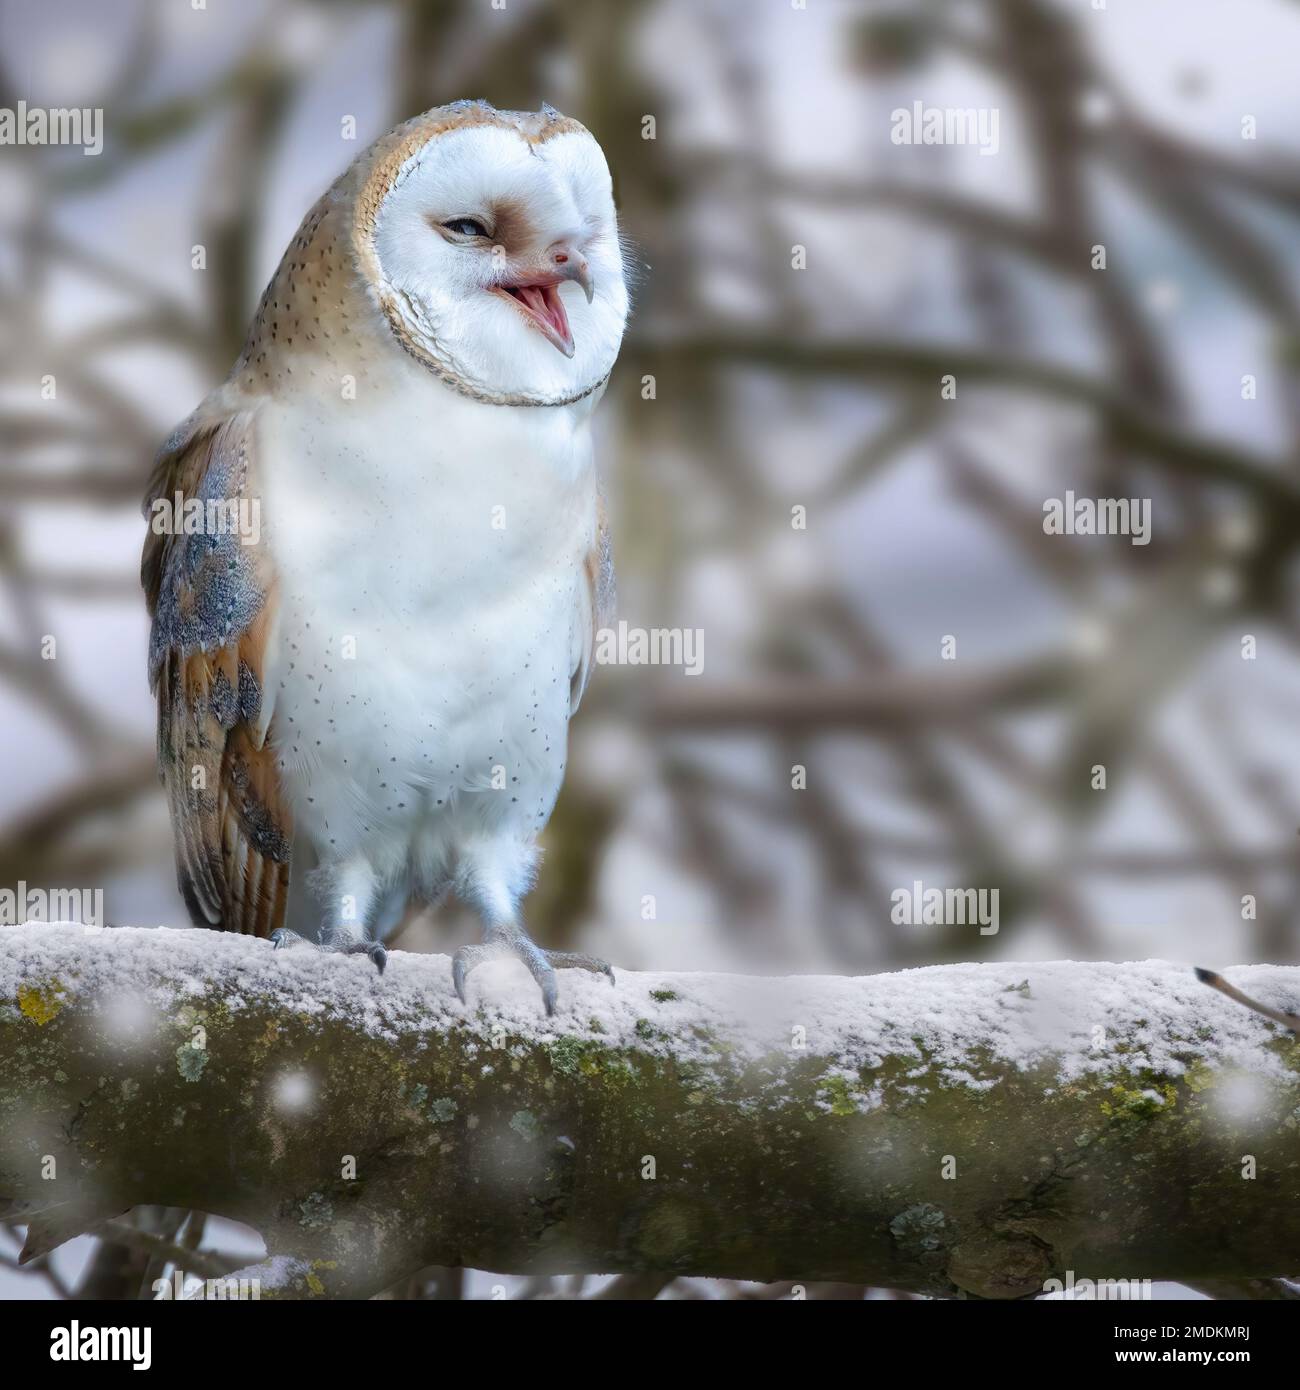 Laughing owl. Yorkshire, UK: THESE STUNNING images taken on last Friday 20th January show a Yorkshire barn owl darting in and out of the falling snow. Stock Photo